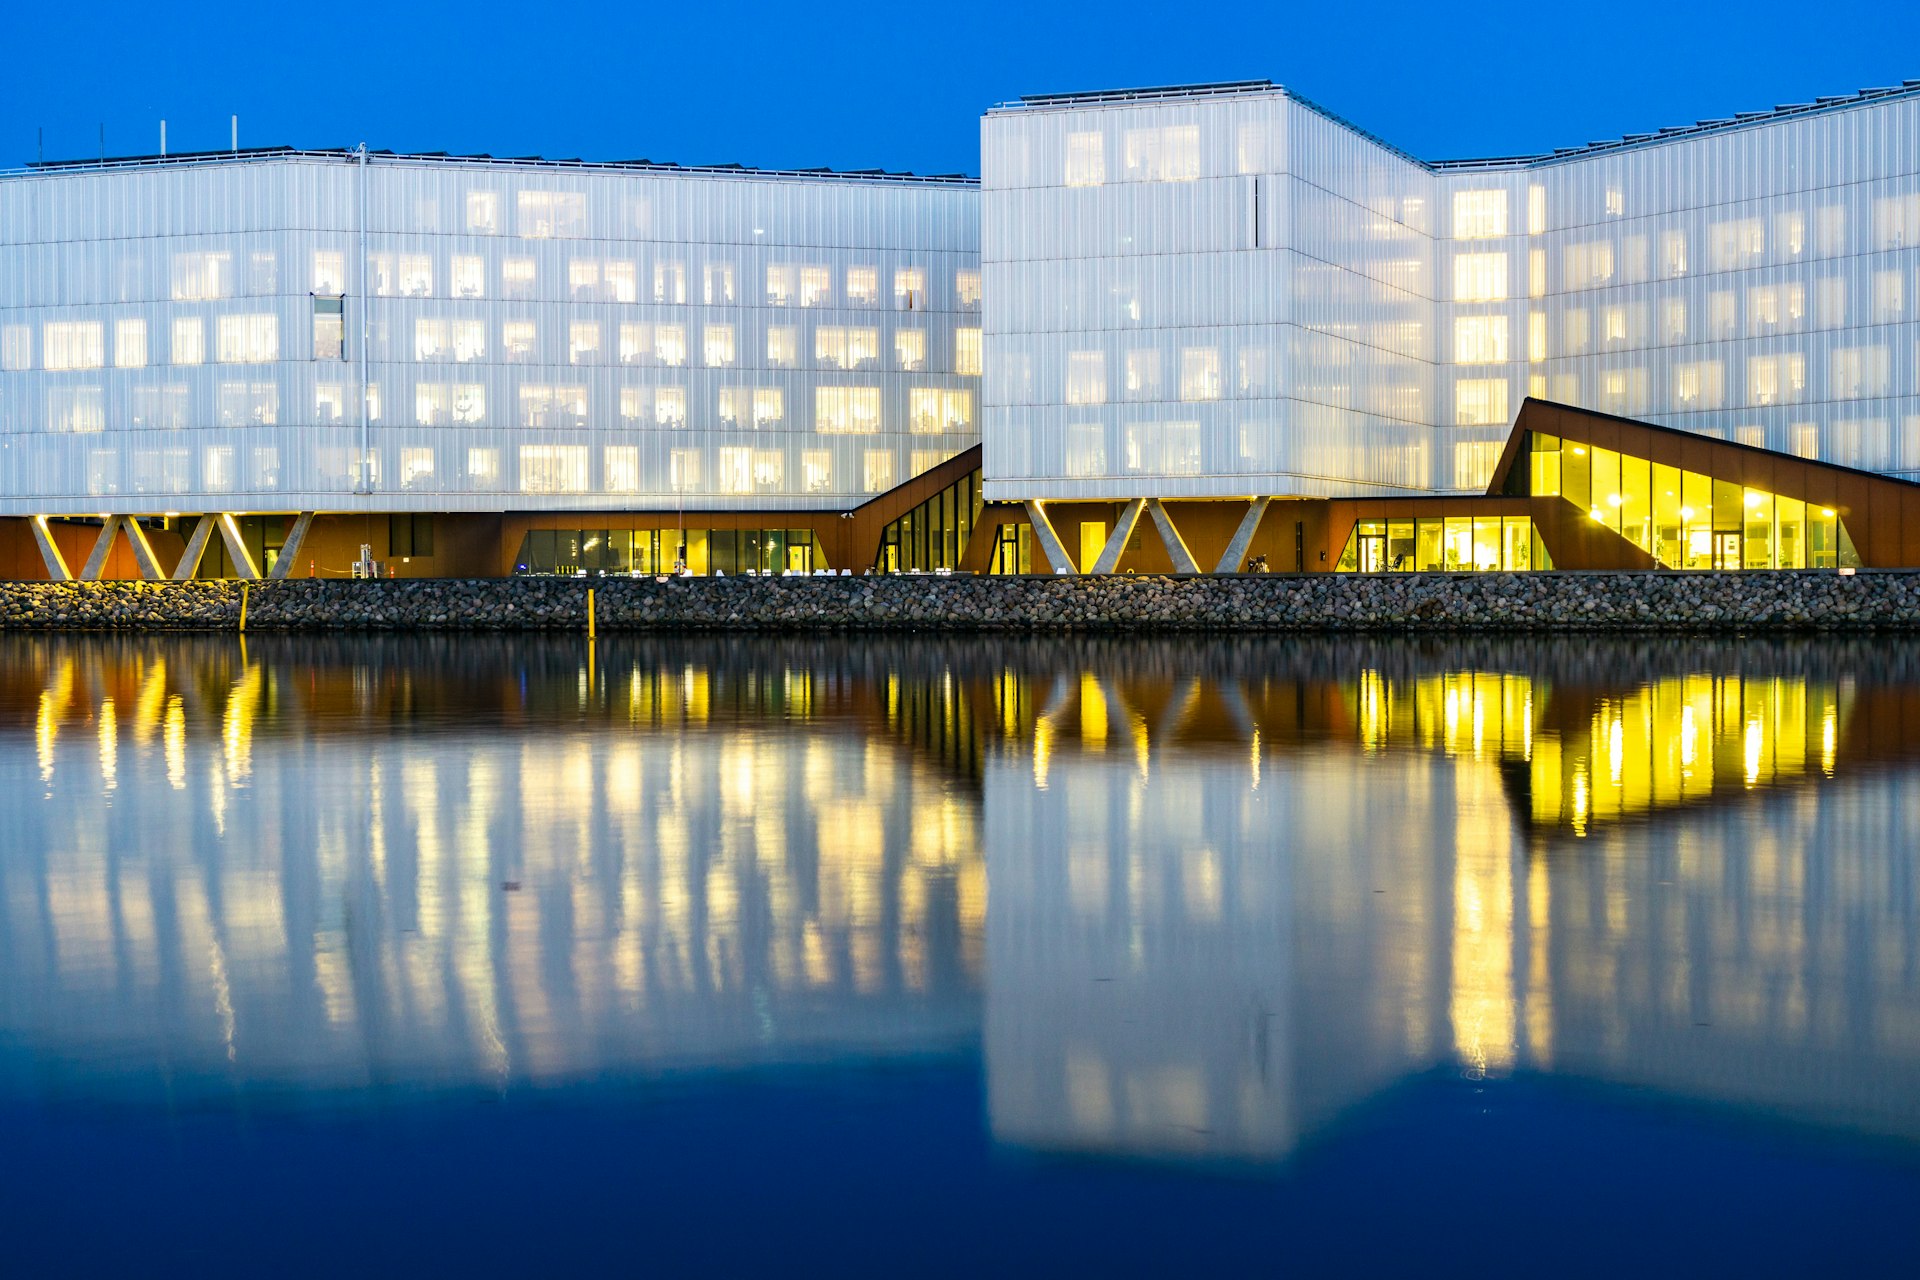 The UN City building reflected in the water by night, Nordhavn, Copenhagen, Denmary